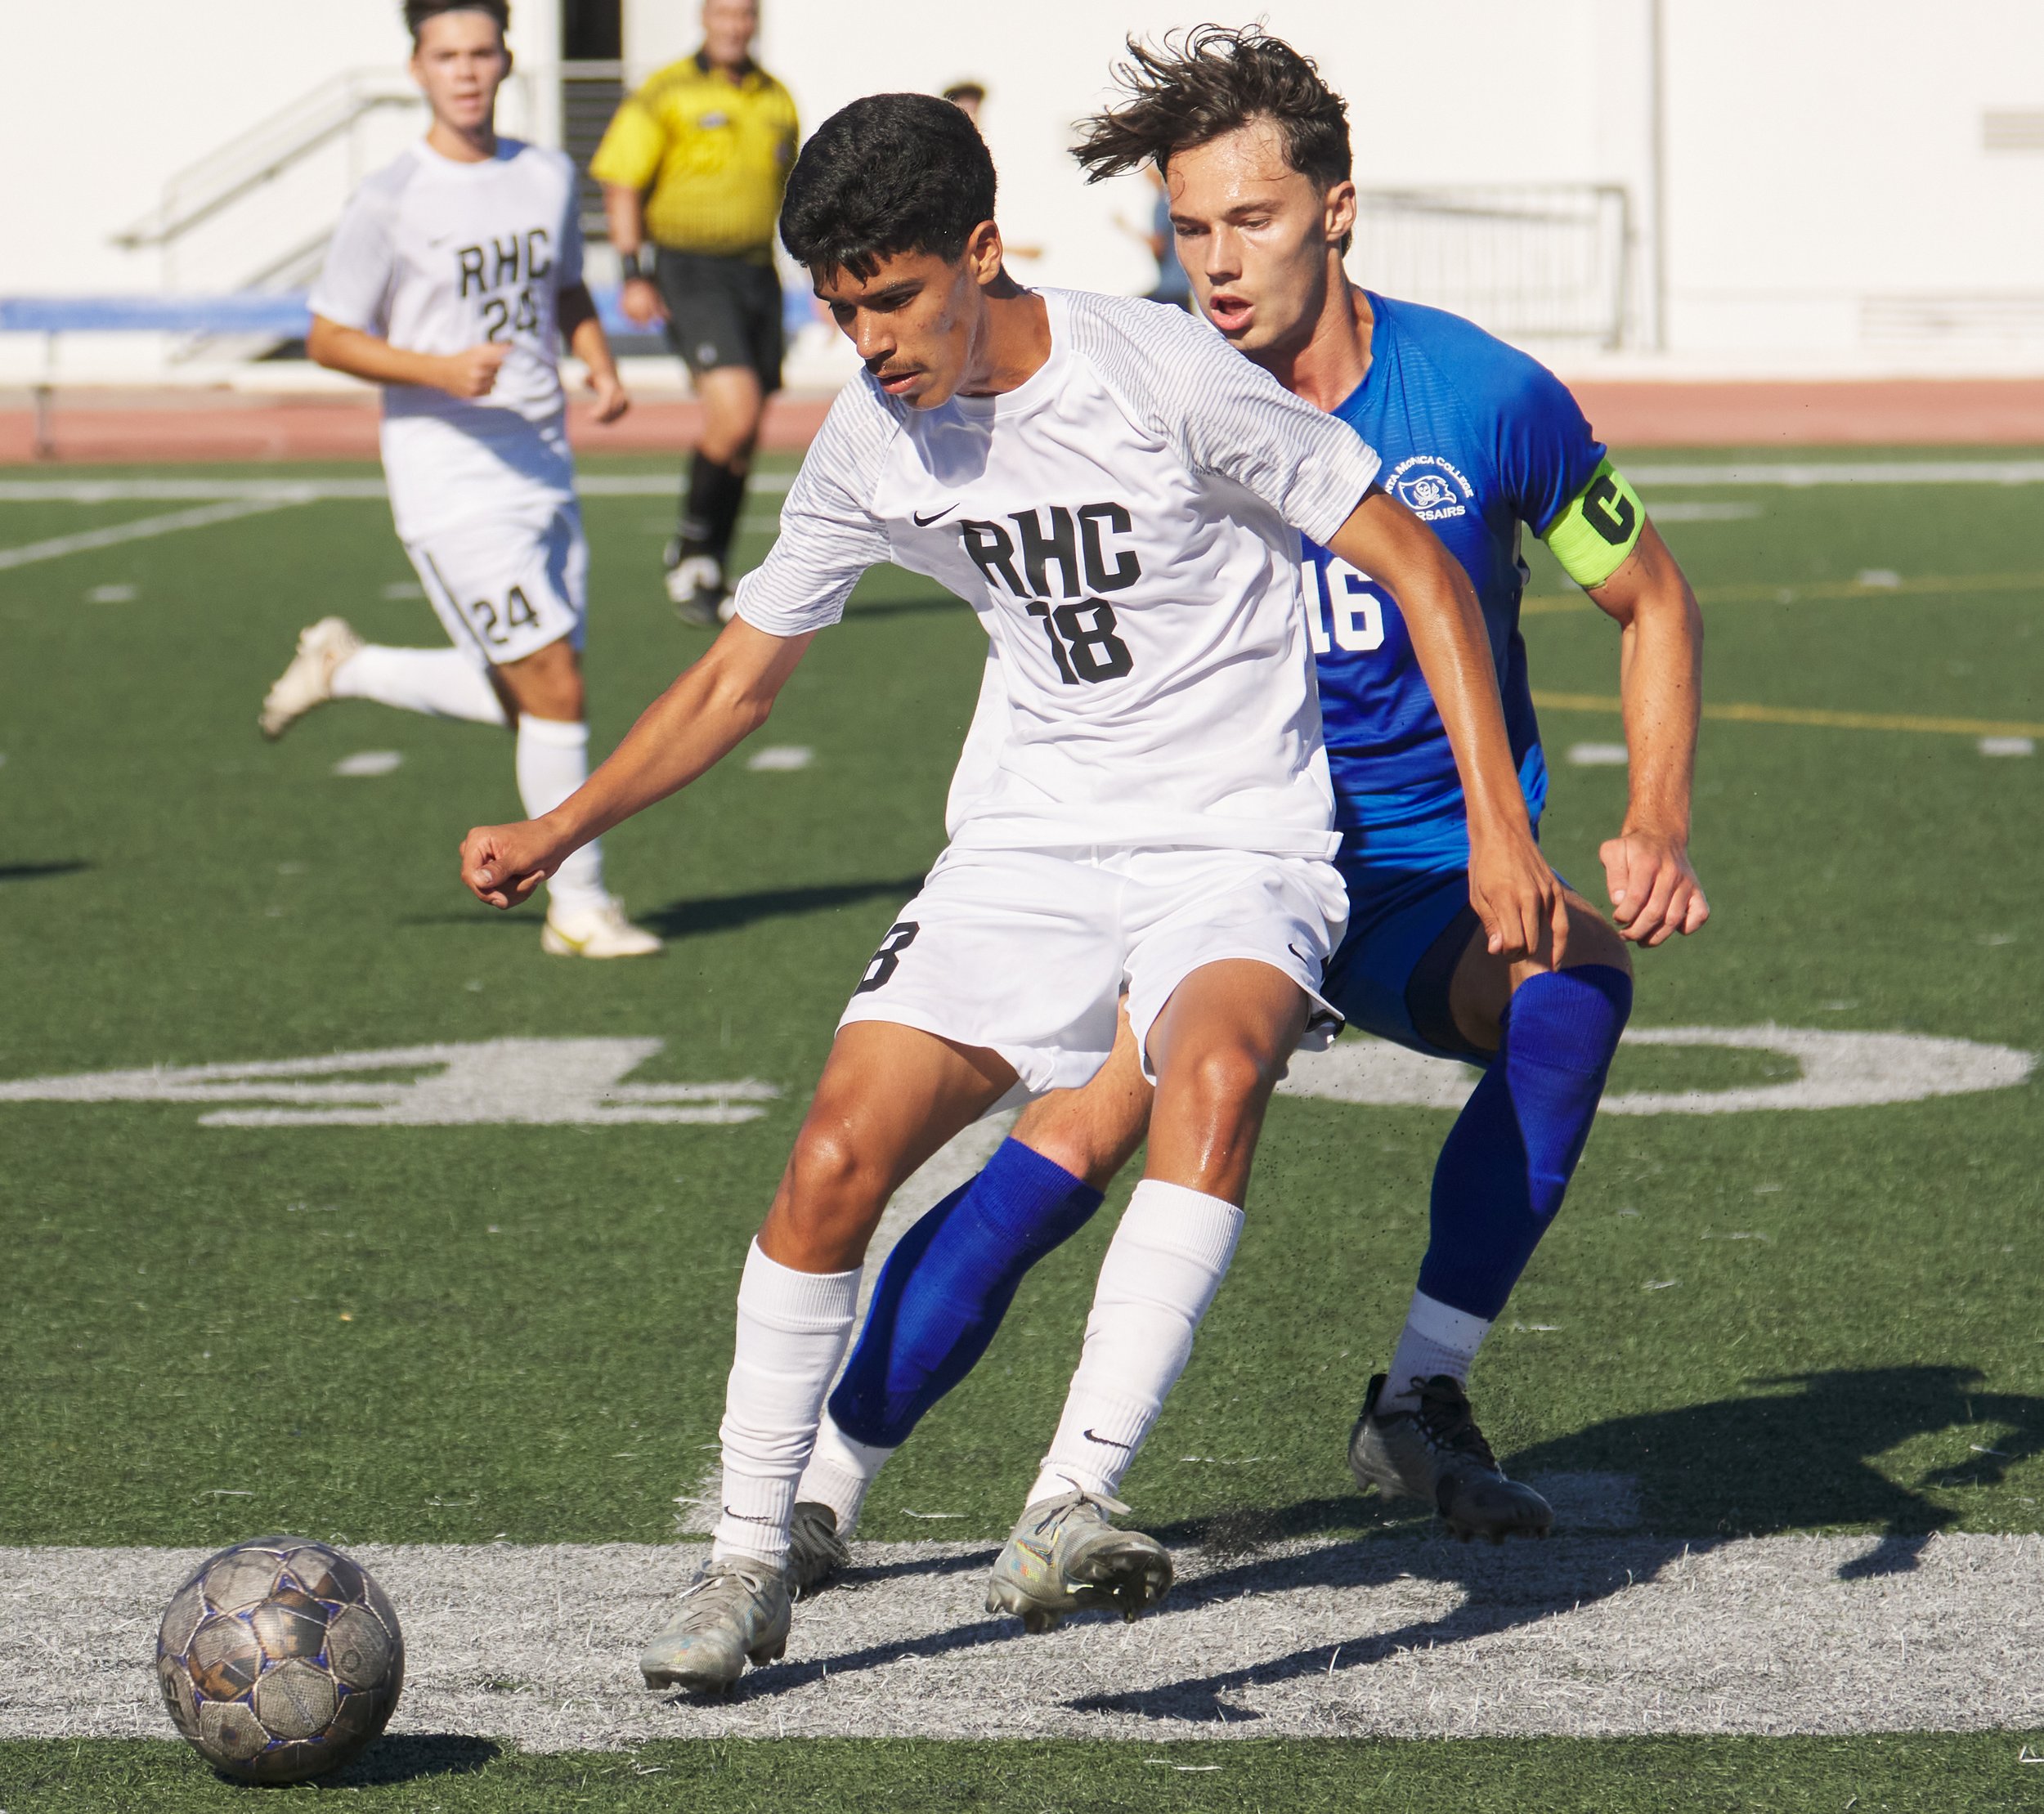  Rio Honod College Roadrunners' Jesus Garcia and Santa Monica College Corsairs' Kyler Sorber during the men's soccer match on Friday, Sept. 24, 2022, at Corsair Field in Santa Monica, Calif. The Corsairs won 2-1. (Nicholas McCall | The Corsair) 